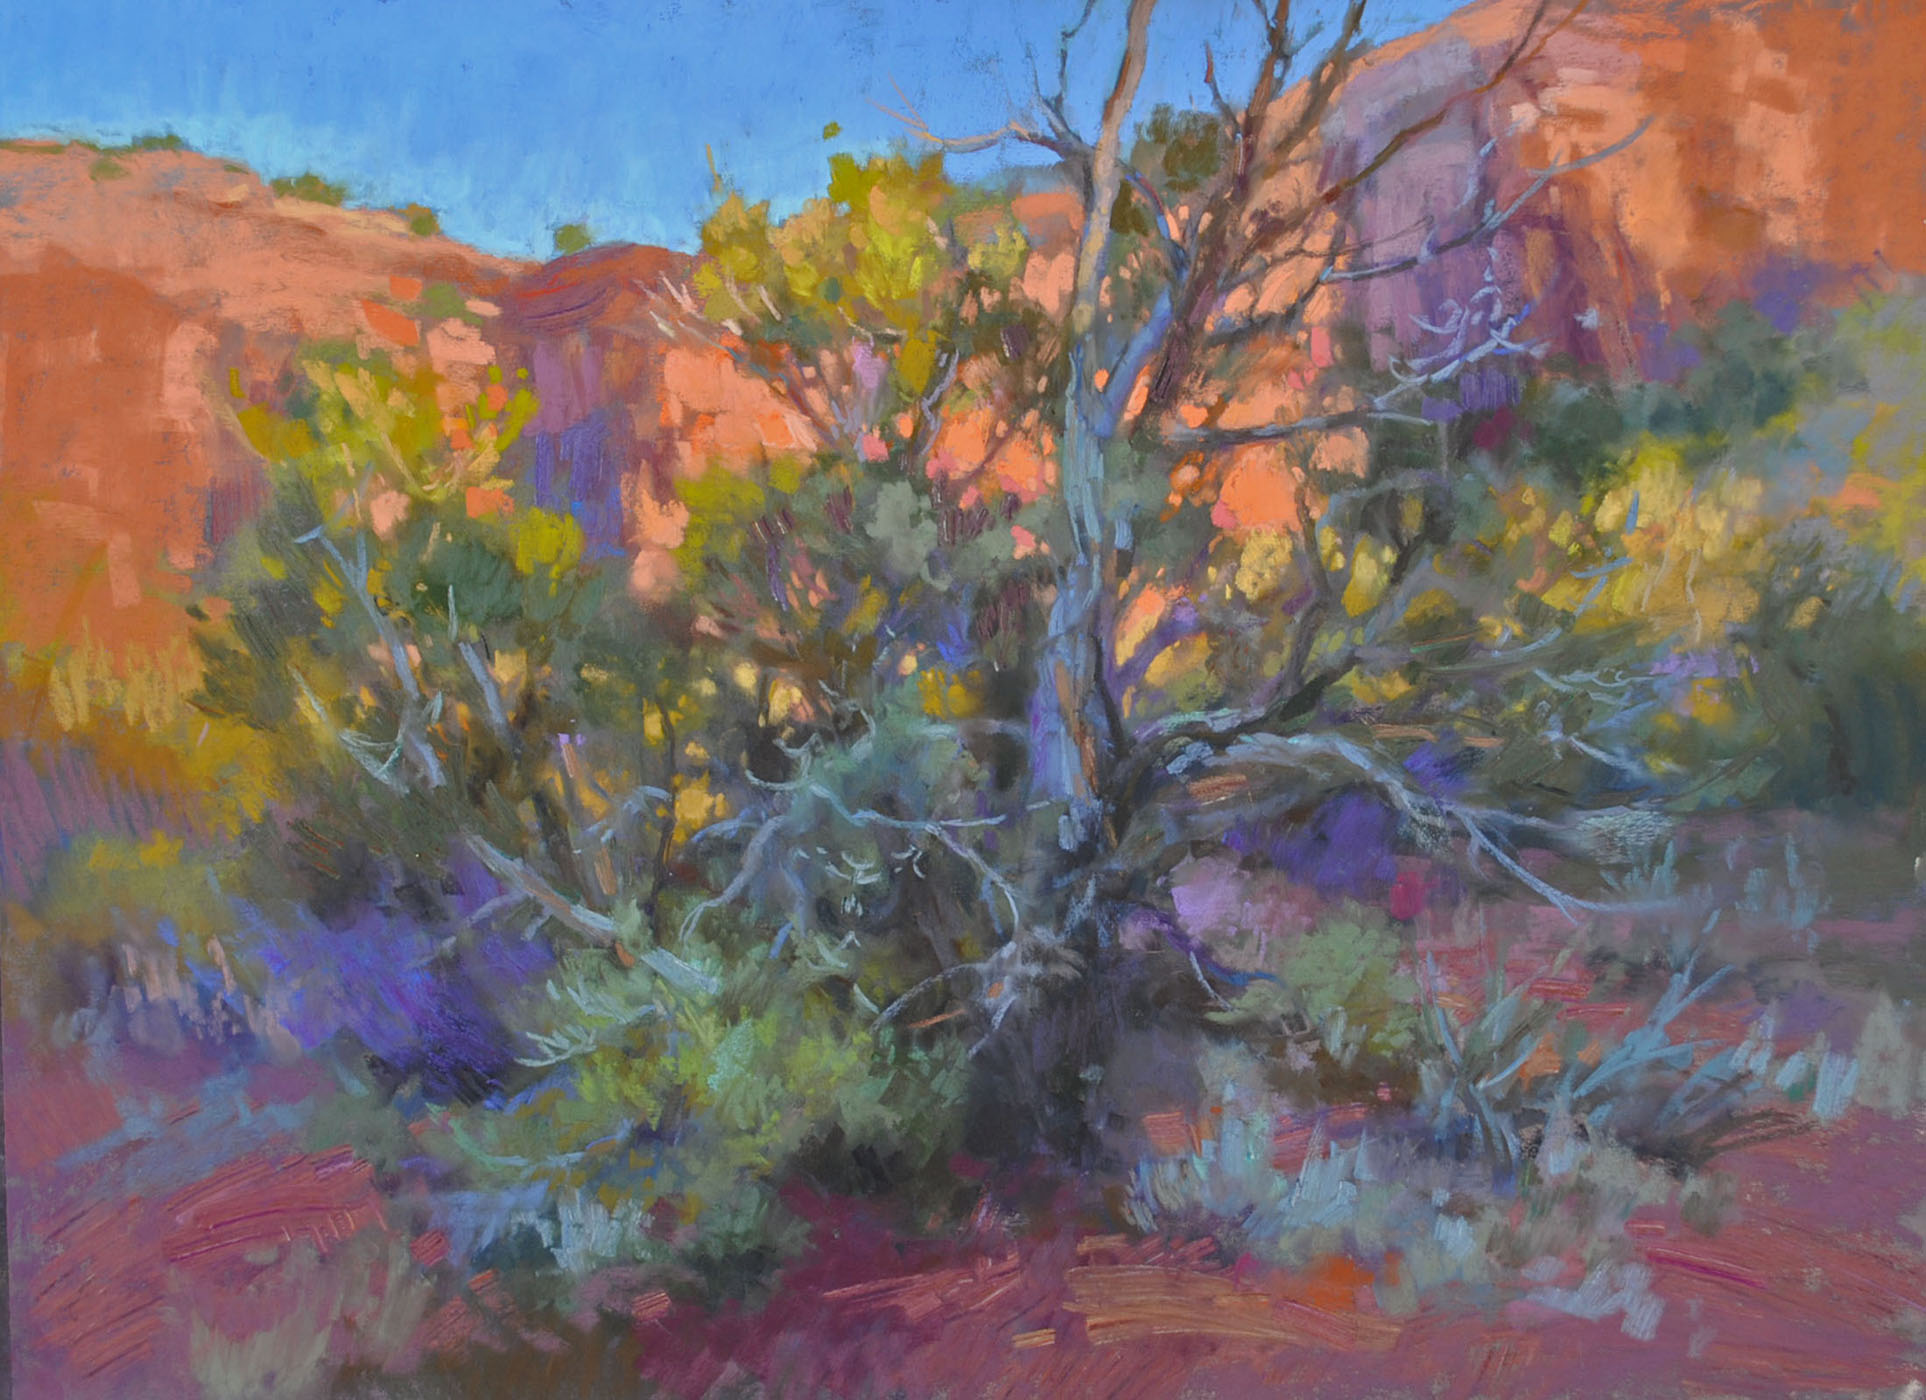 Christine Debrosky, "Sedona Lace," 2016, Terry Ludwig, Great American, Schmincke and various other pastels on burgundy Pastelmat, 18x24 in. Sold. I am always taken with shadowed tree branches up against an illuminated backdrop. In this case, a twisted juniper and a rosy Sedona cliff face. It becomes like stained glass with the etched twigs like leading holding the glowing colours.